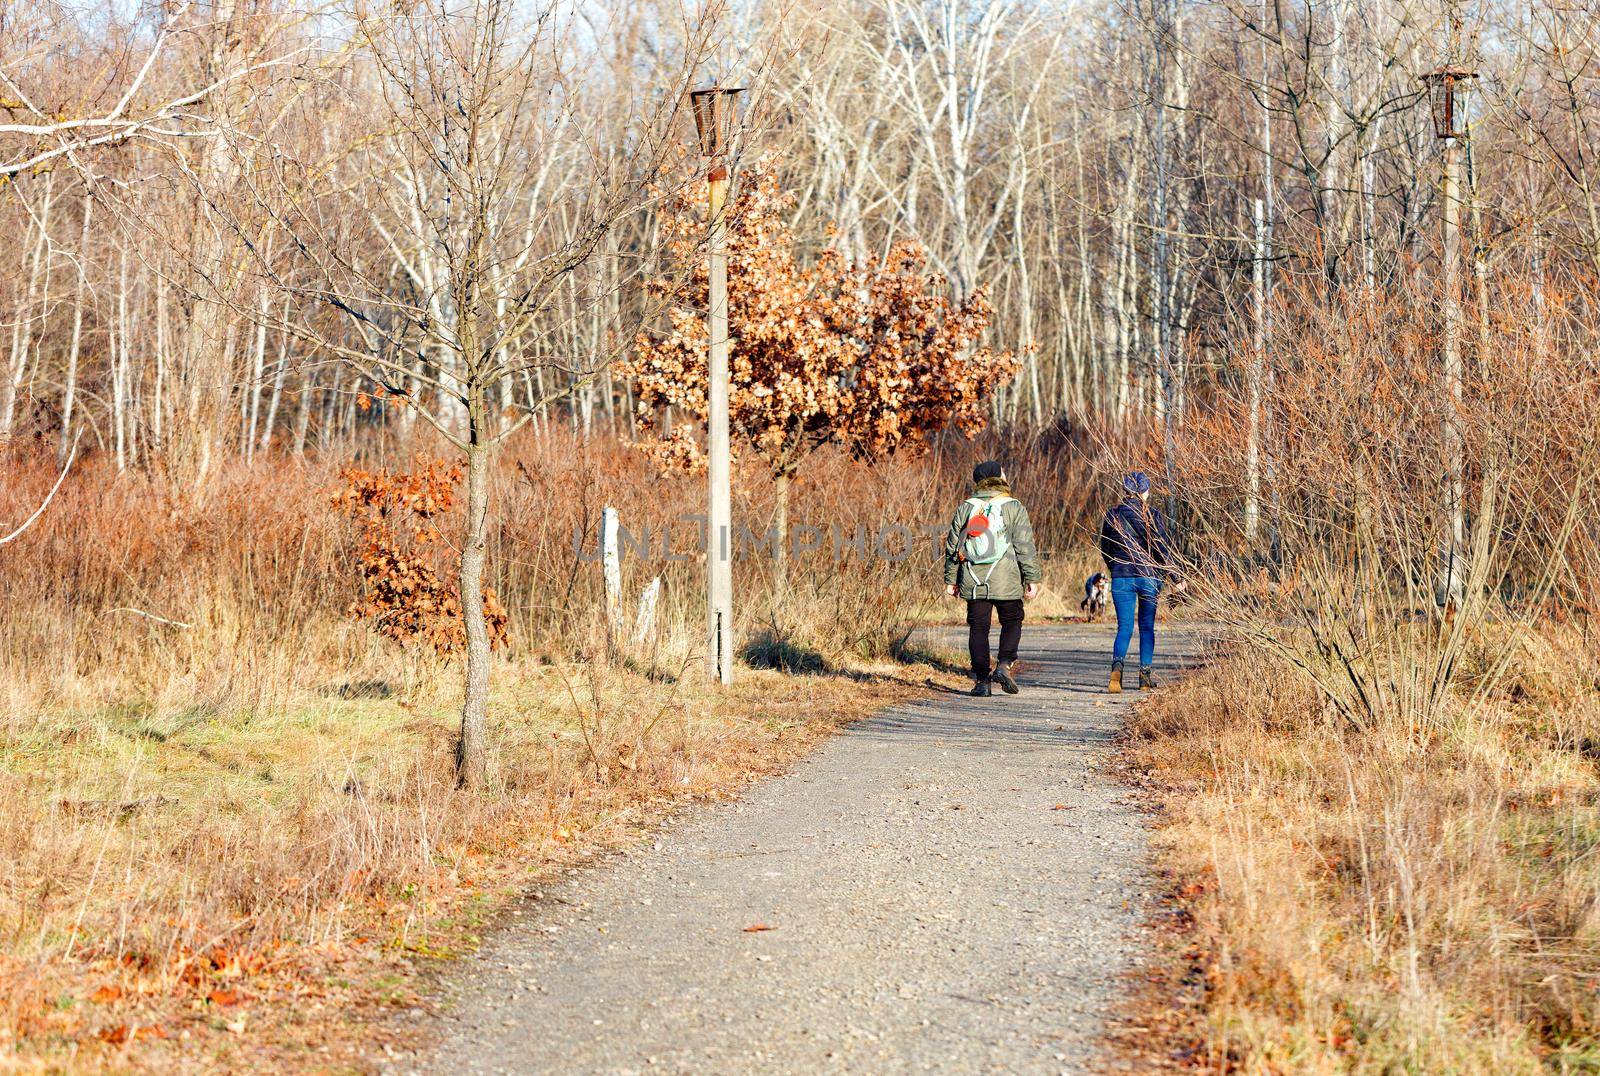 Rusty landscape of the old park in the dry winter season, a married couple of people walk along the path on a bright sunny day.